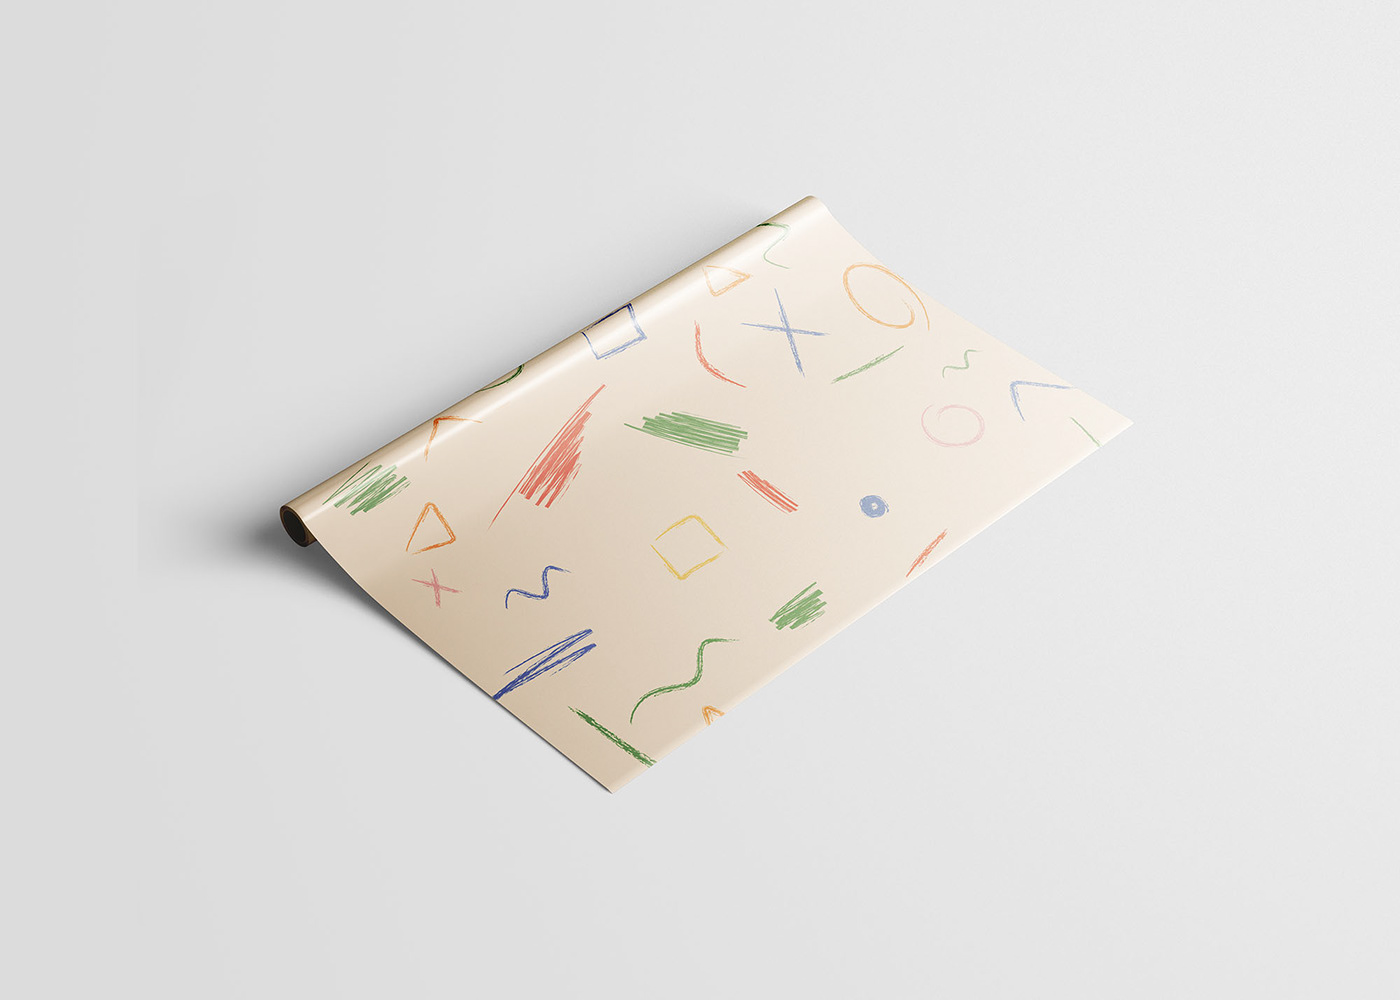 Download Wrapping Paper Mockup On Behance PSD Mockup Templates